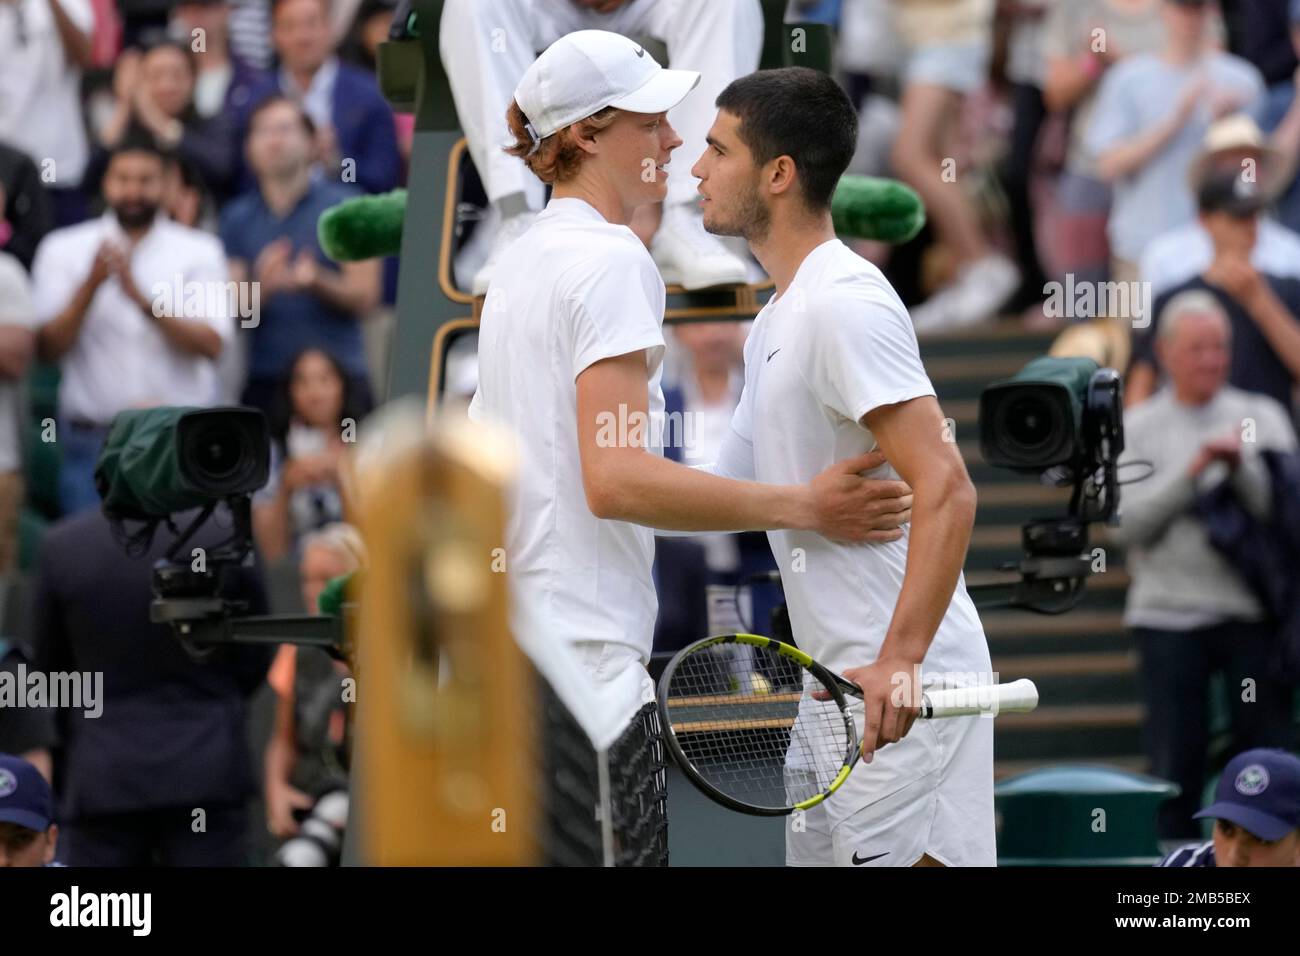 Italys Jannik Sinner hugs Spains Carlos Alcaraz after defeating him a mens fourth round singles match on day seven of the Wimbledon tennis championships in London, Sunday, July 3, 2022.(AP Photo/Kirsty Wigglesworth